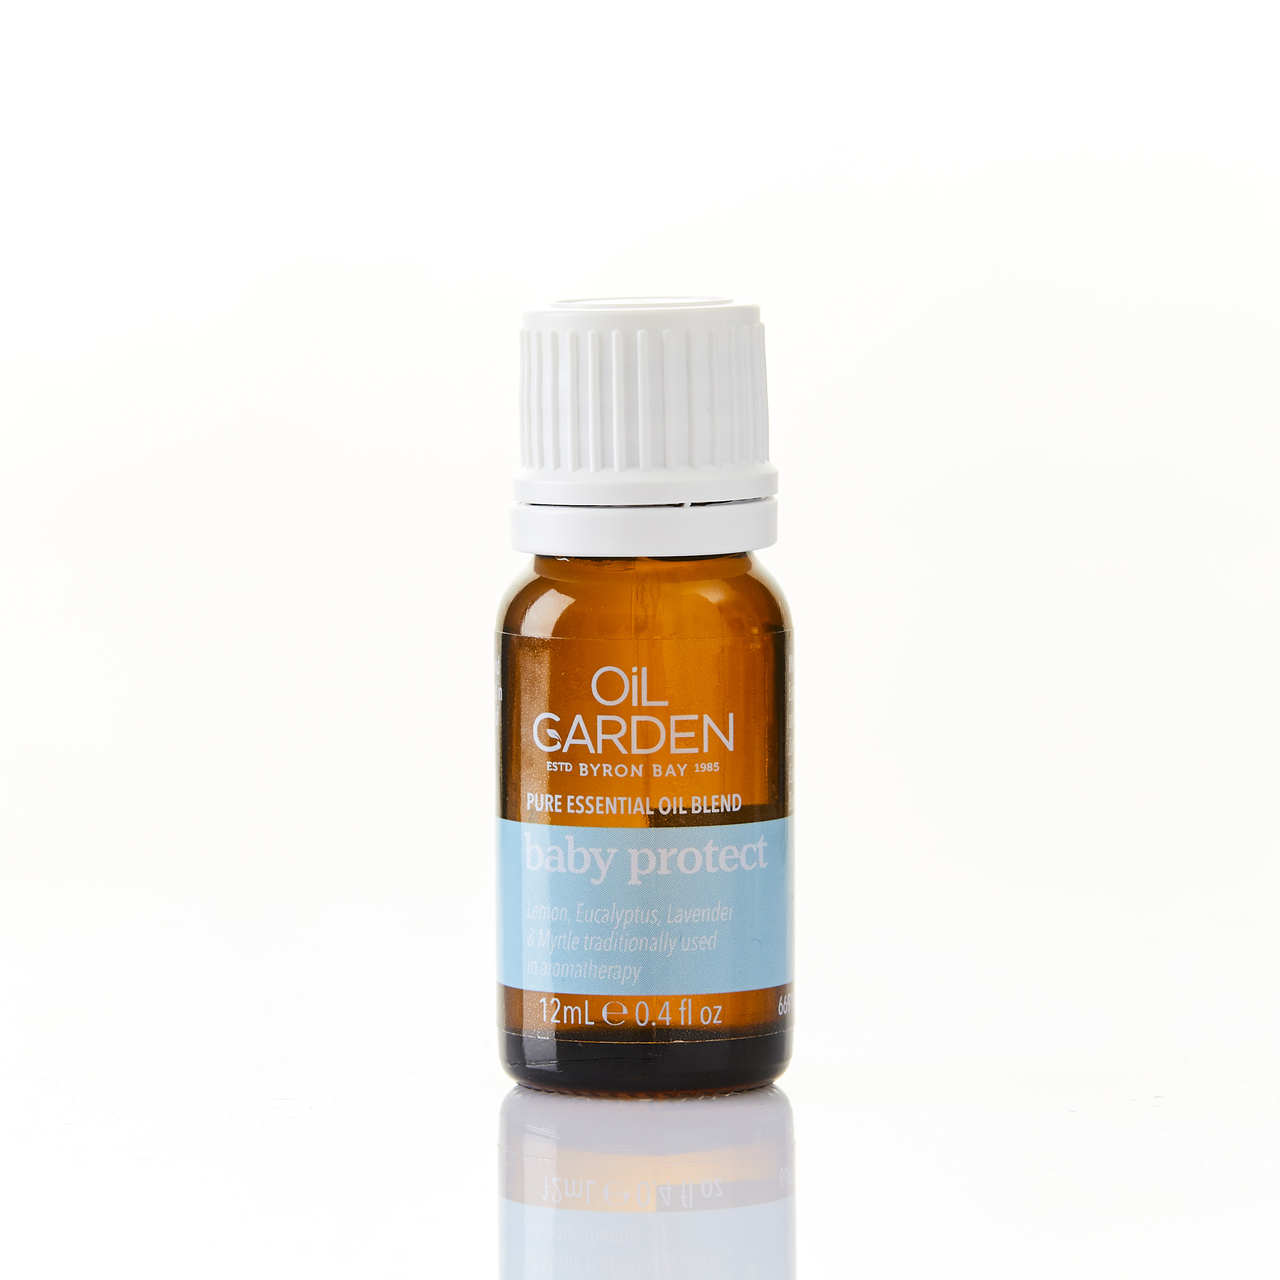 Oil Garden Baby Protect Essential Oil Blend 12mL